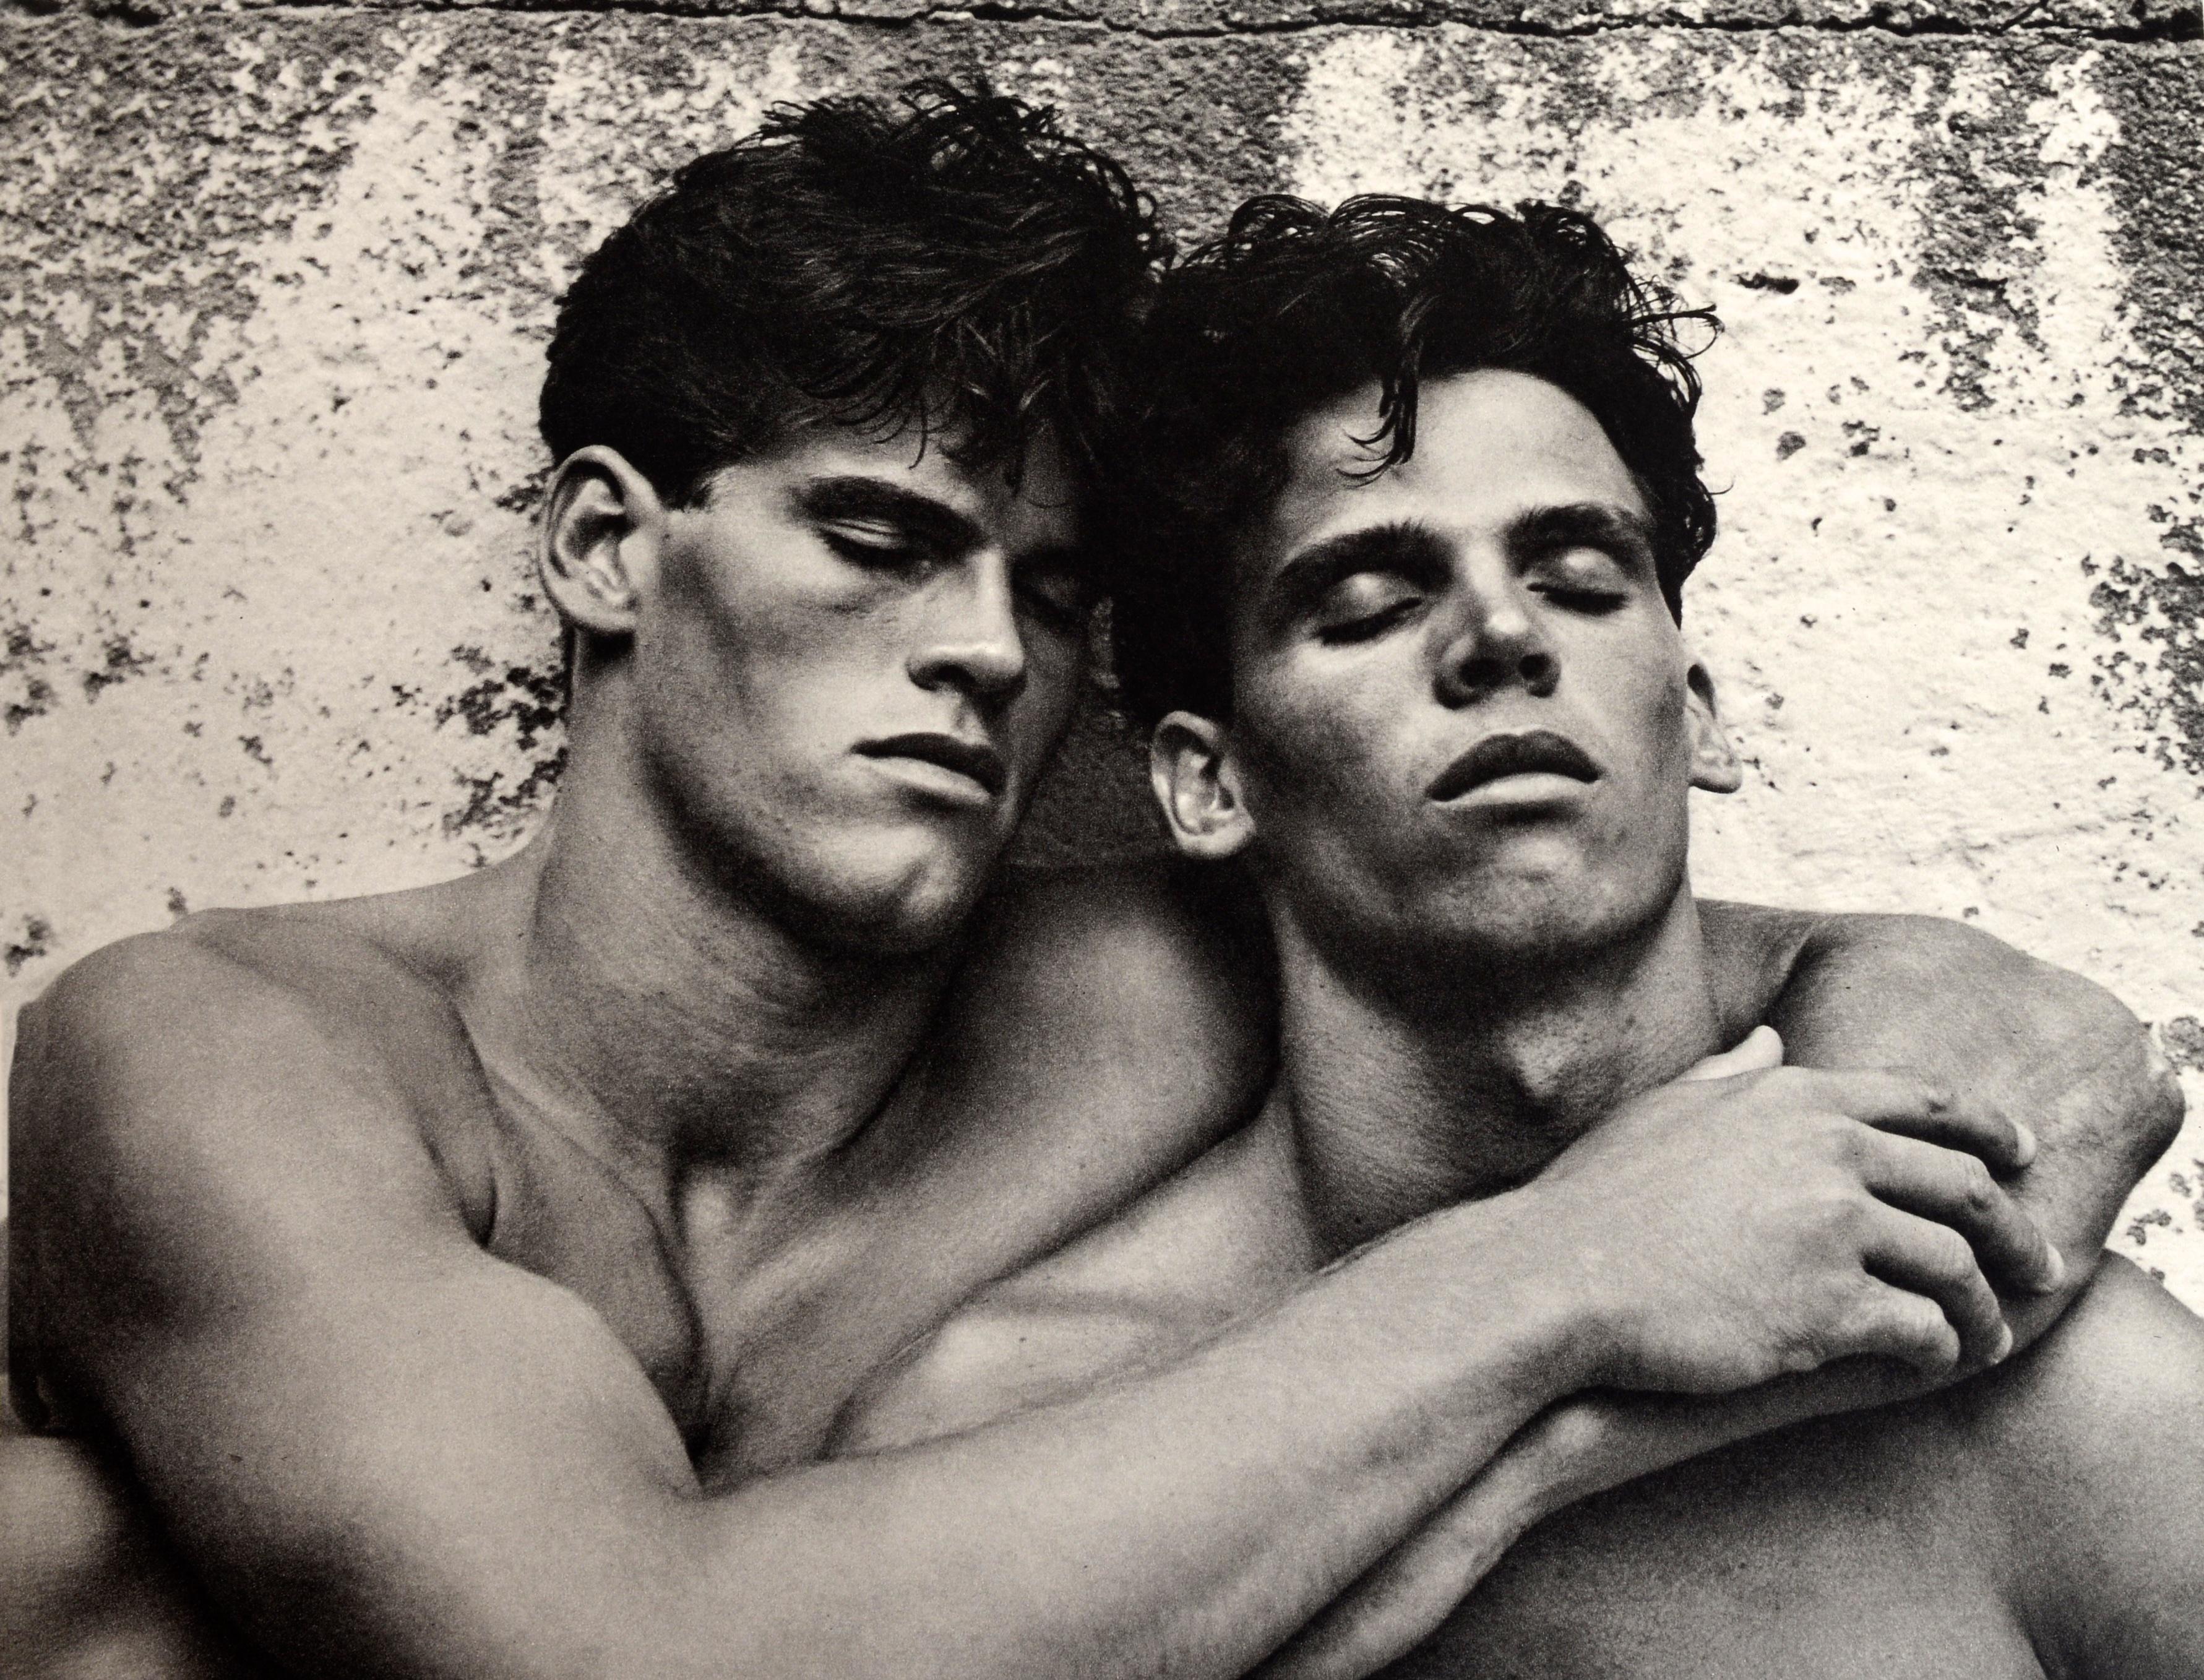 Paper Bruce Weber by Bruce Weber, 1st Limited Edition For Sale